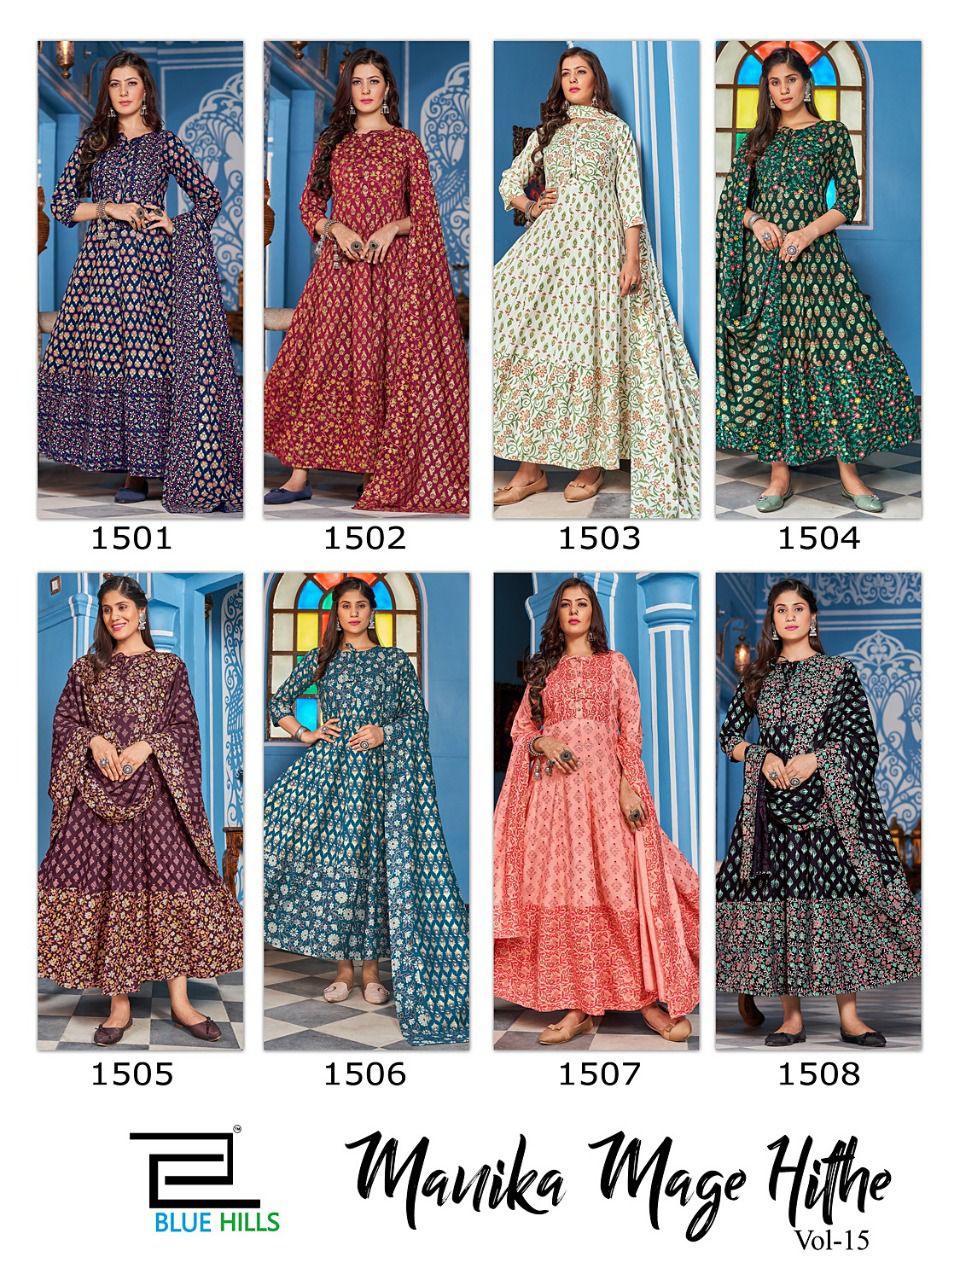 Blue Hills Manika Mage Hithe Vol 15 collection 8